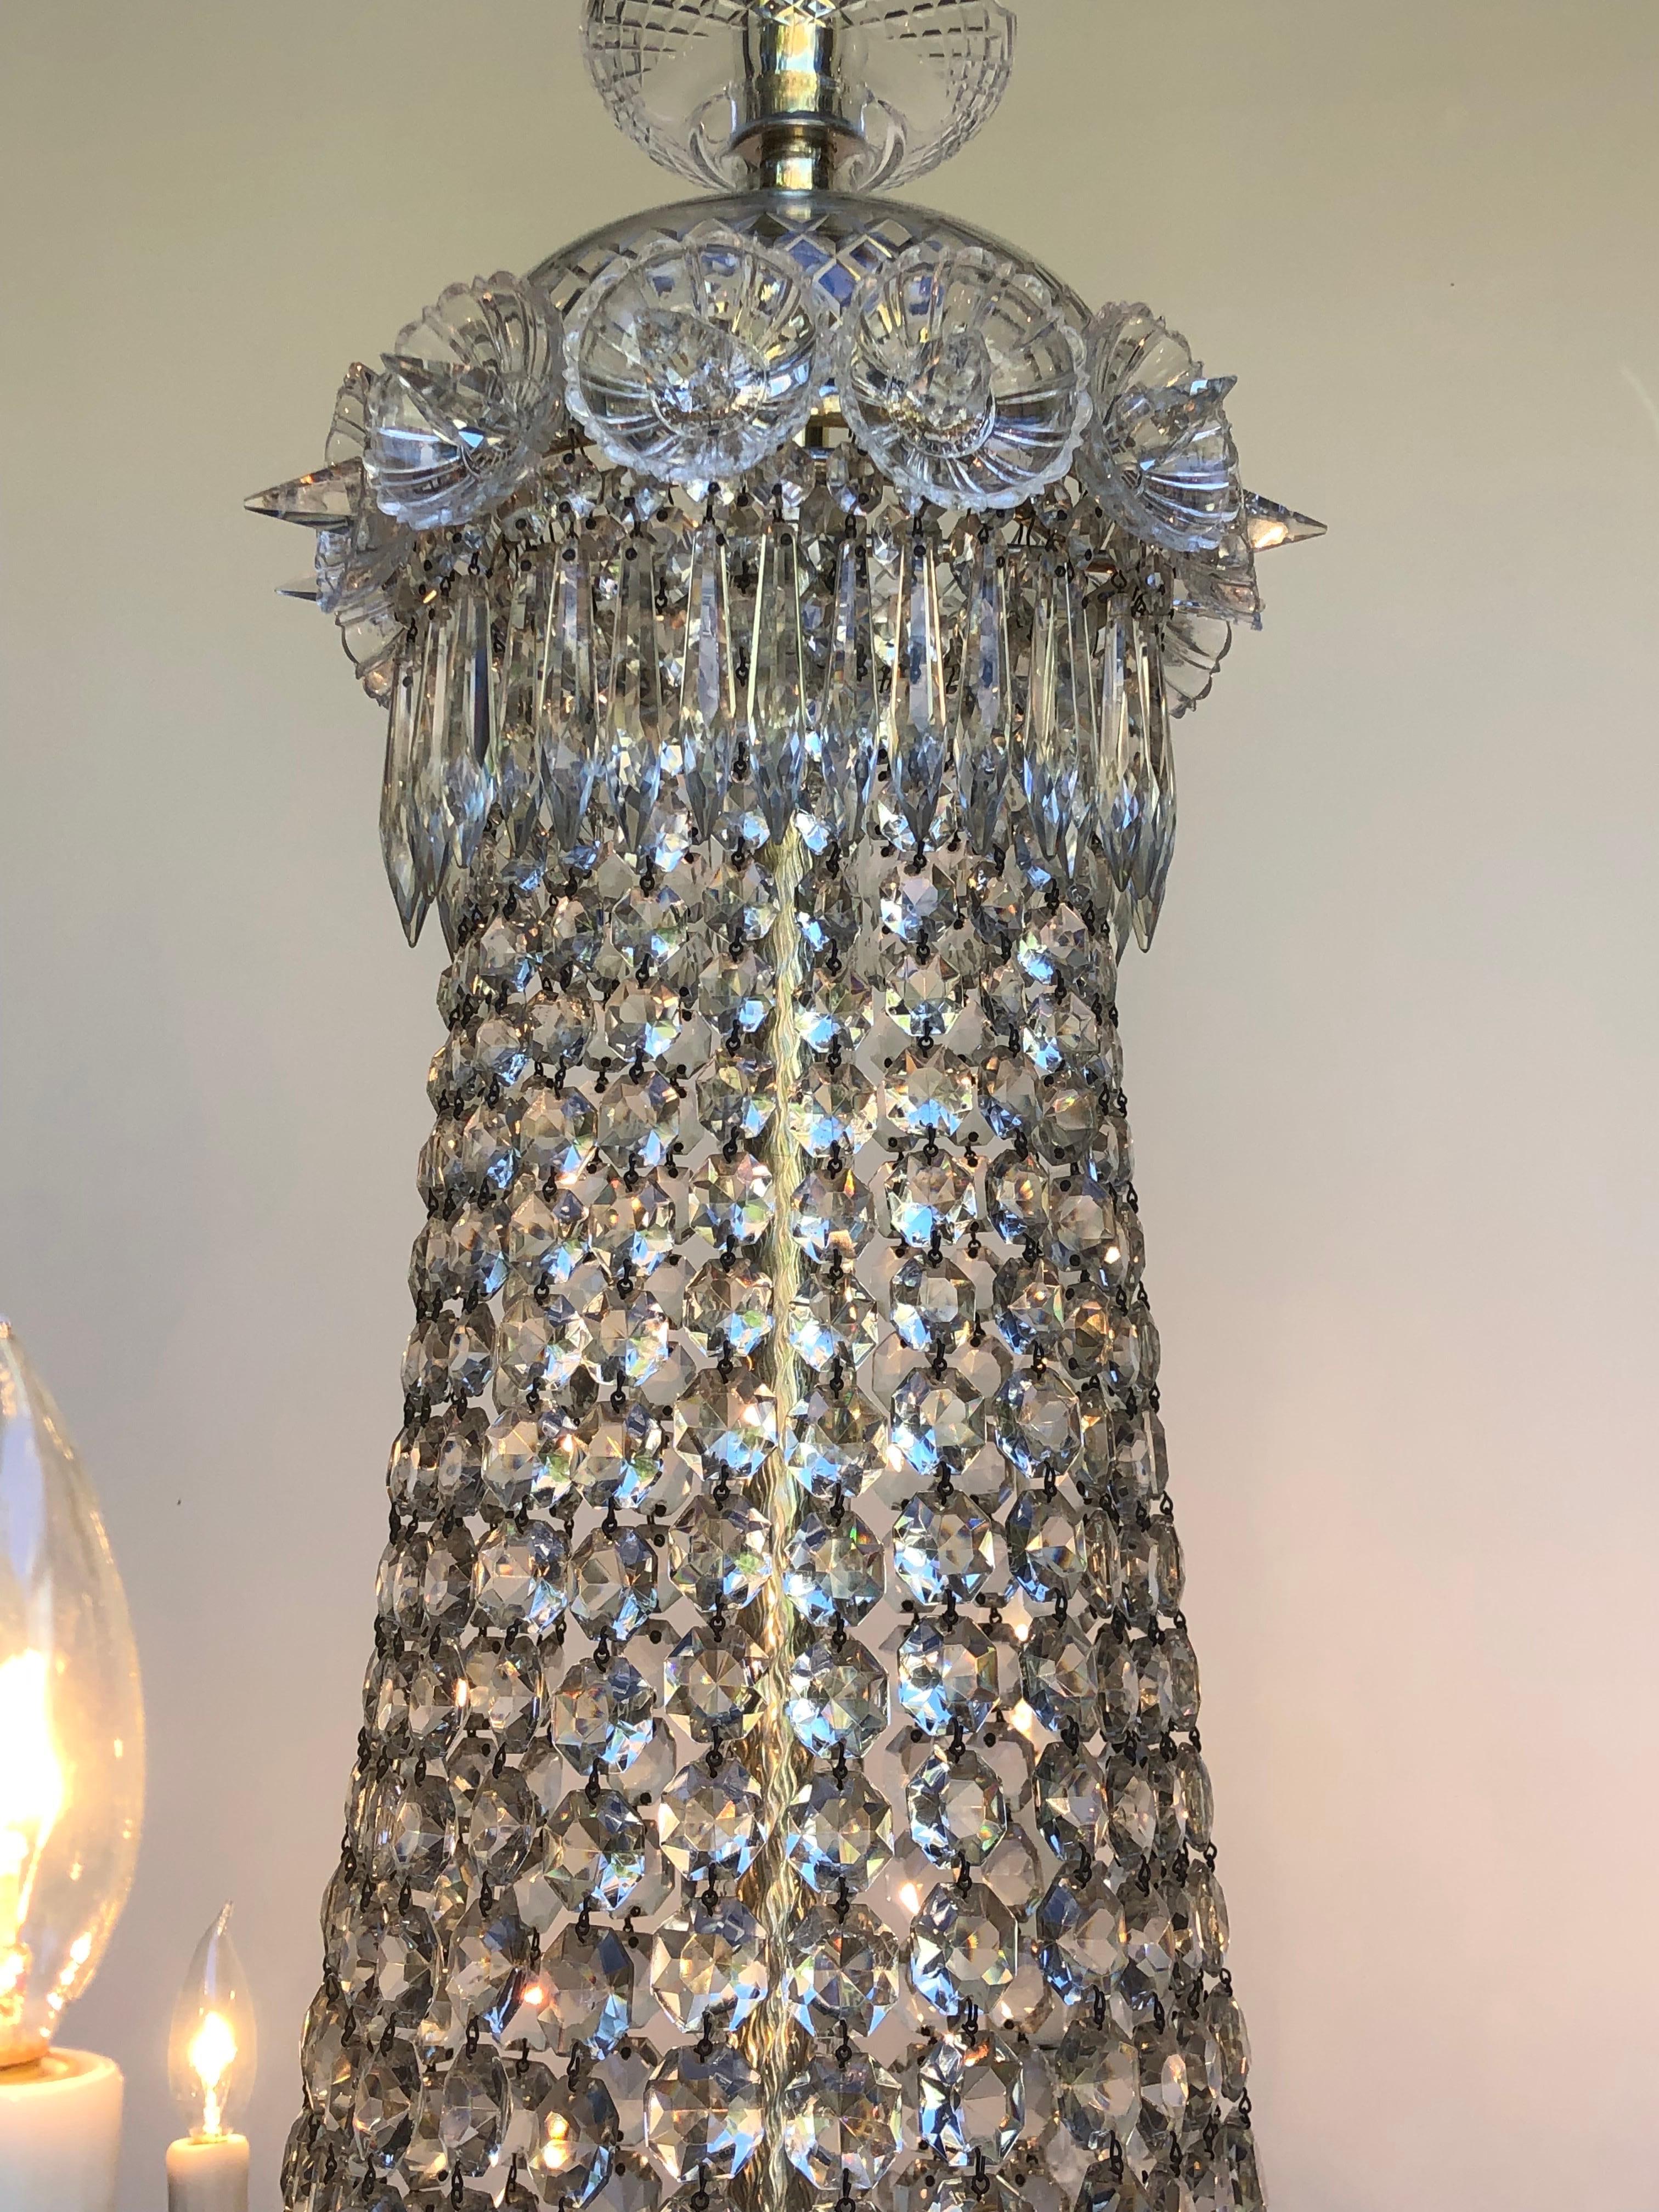 19th Century Regency Tent-and-Basket Silver Plate & Crystal Chandelier / Gasolier Eight Light For Sale